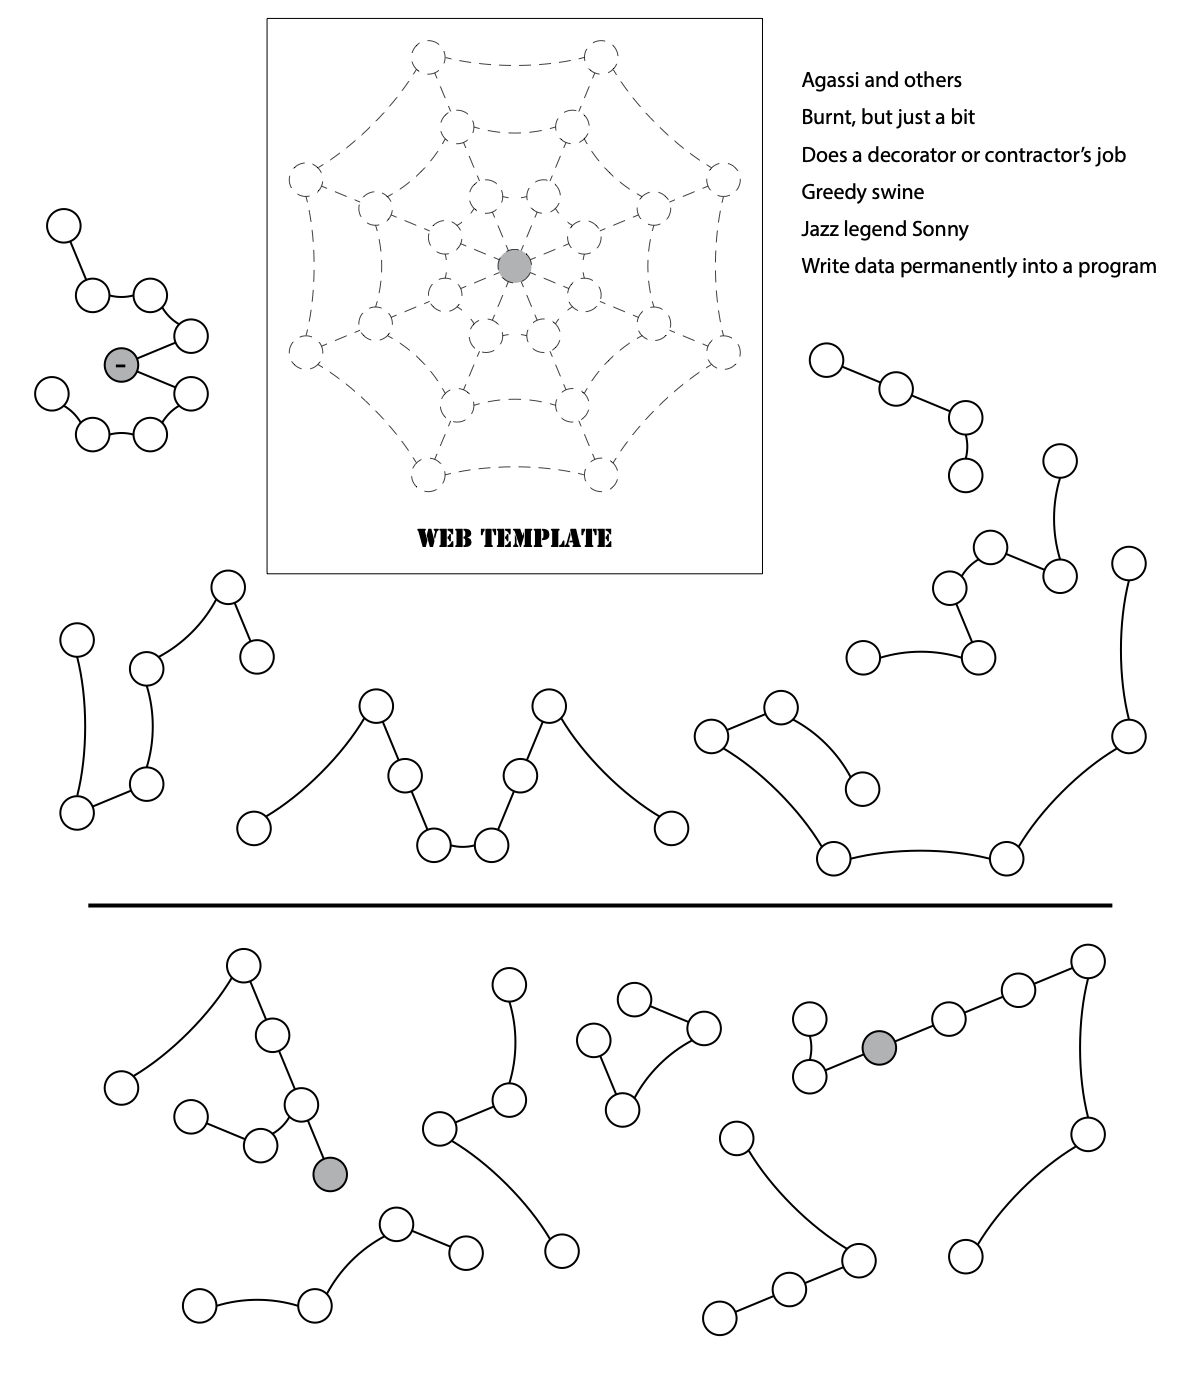 a box labeled Web Template contains circles connected by lines in the shape of a spider web. The center circle is greyed out. There are phrases next to the box. Outside the box, there are circle-and-line graphs.